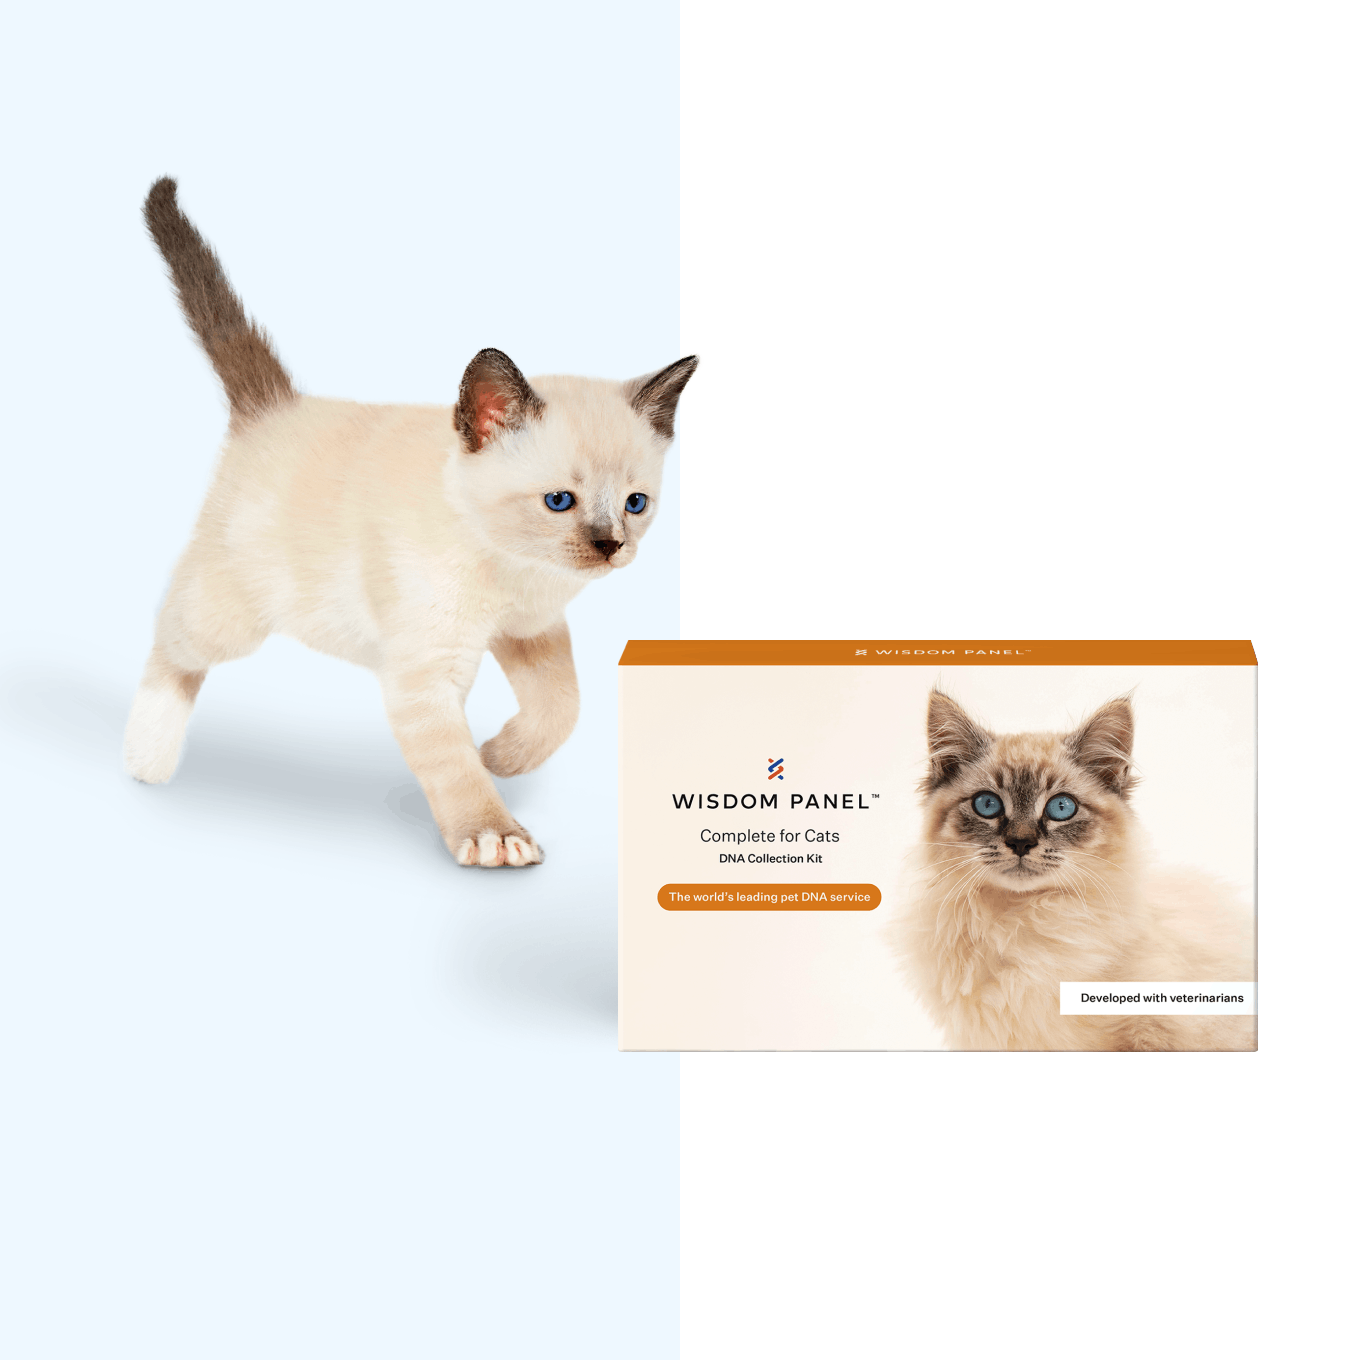 Siamese kitten running towards a Wisdom Panel Complete for Cats product box.